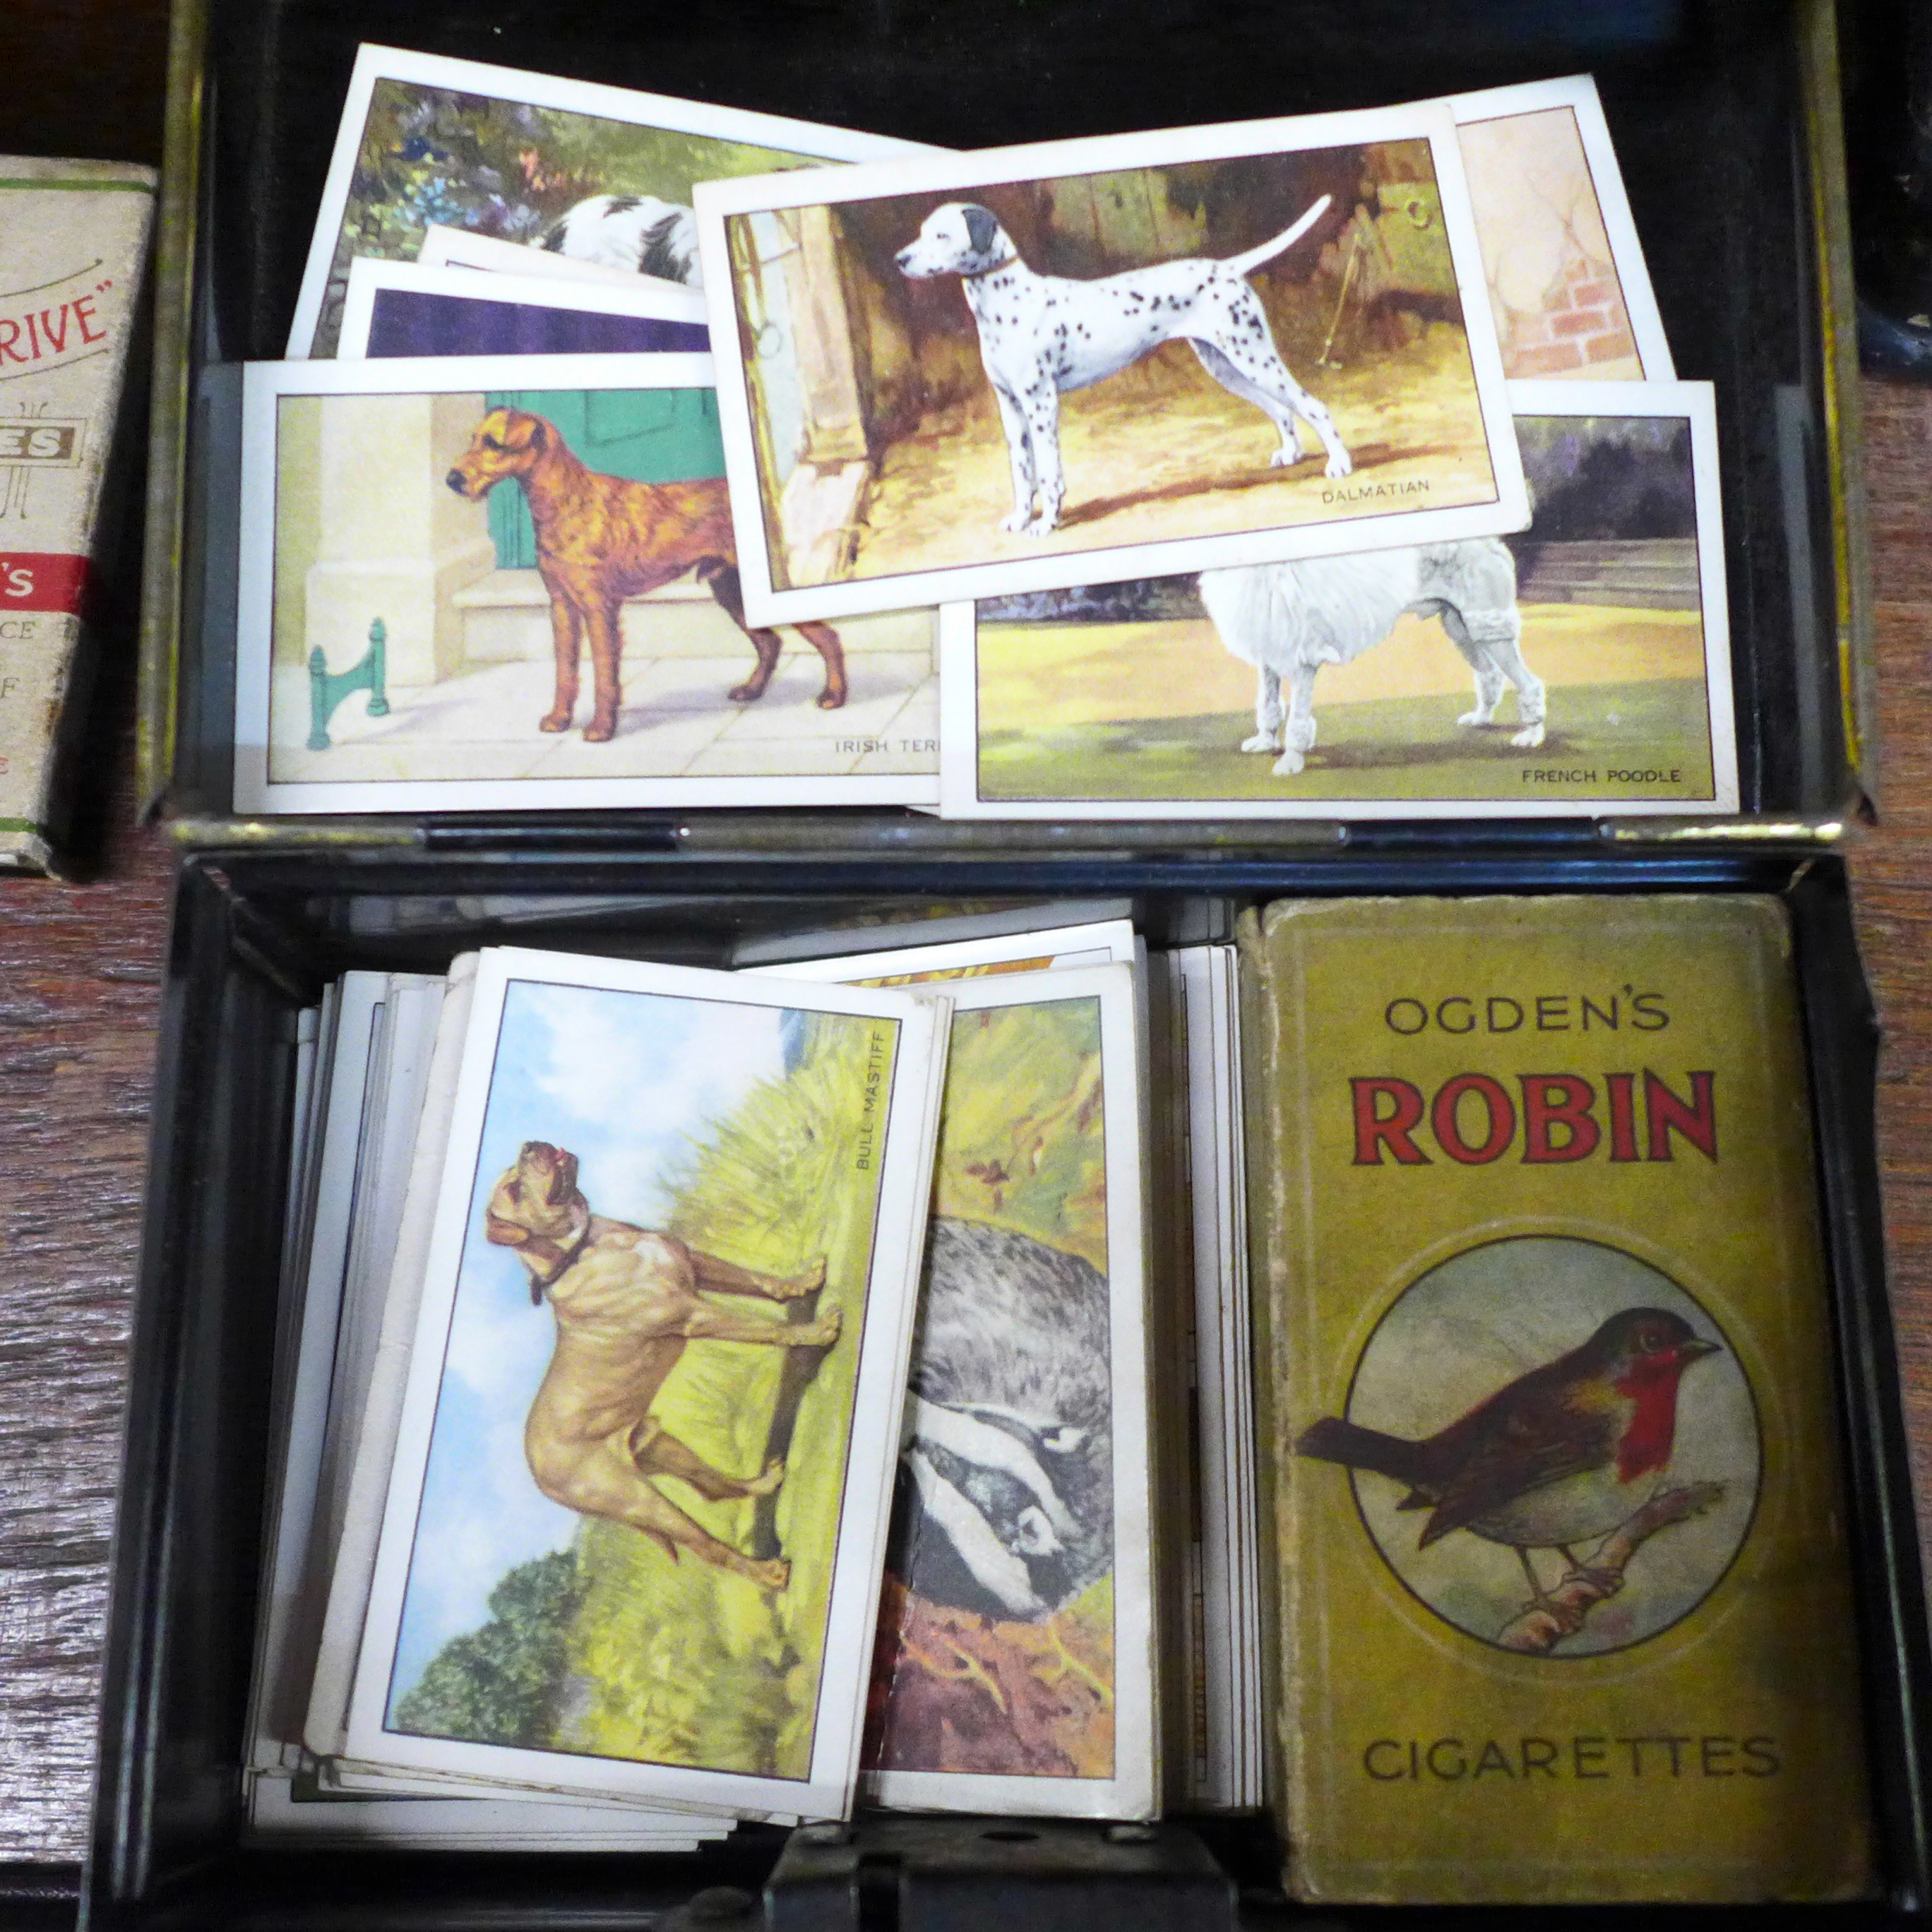 Nottingham postcards, cigarette cards and two lacquered boxes, for gloves and hankies - Image 6 of 6